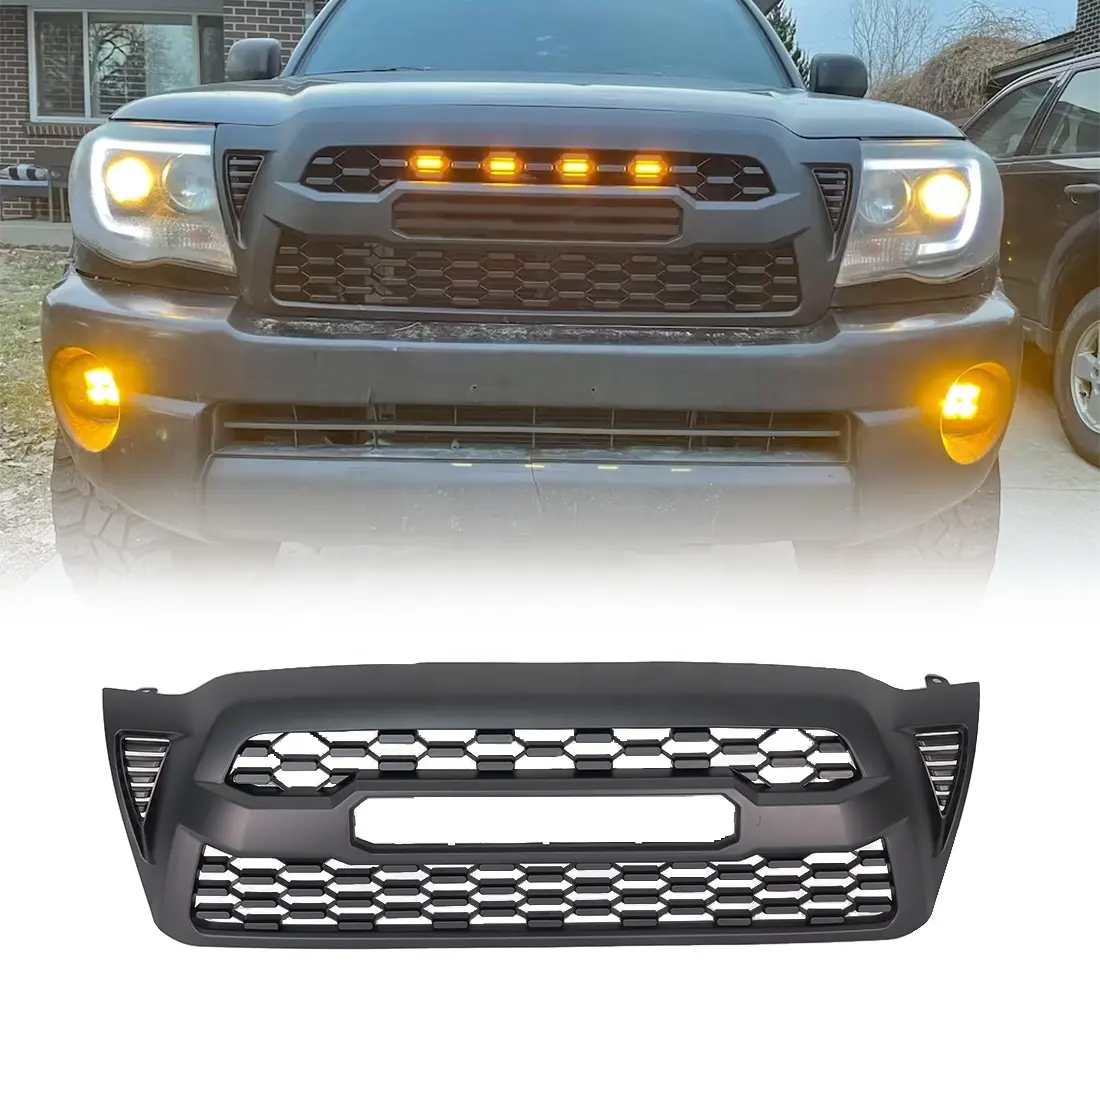 Offroad Part Front Grille Car Grills Grill With LED Lights Fit For 2005-2011 Toyota Tacoma Matte Black ABS